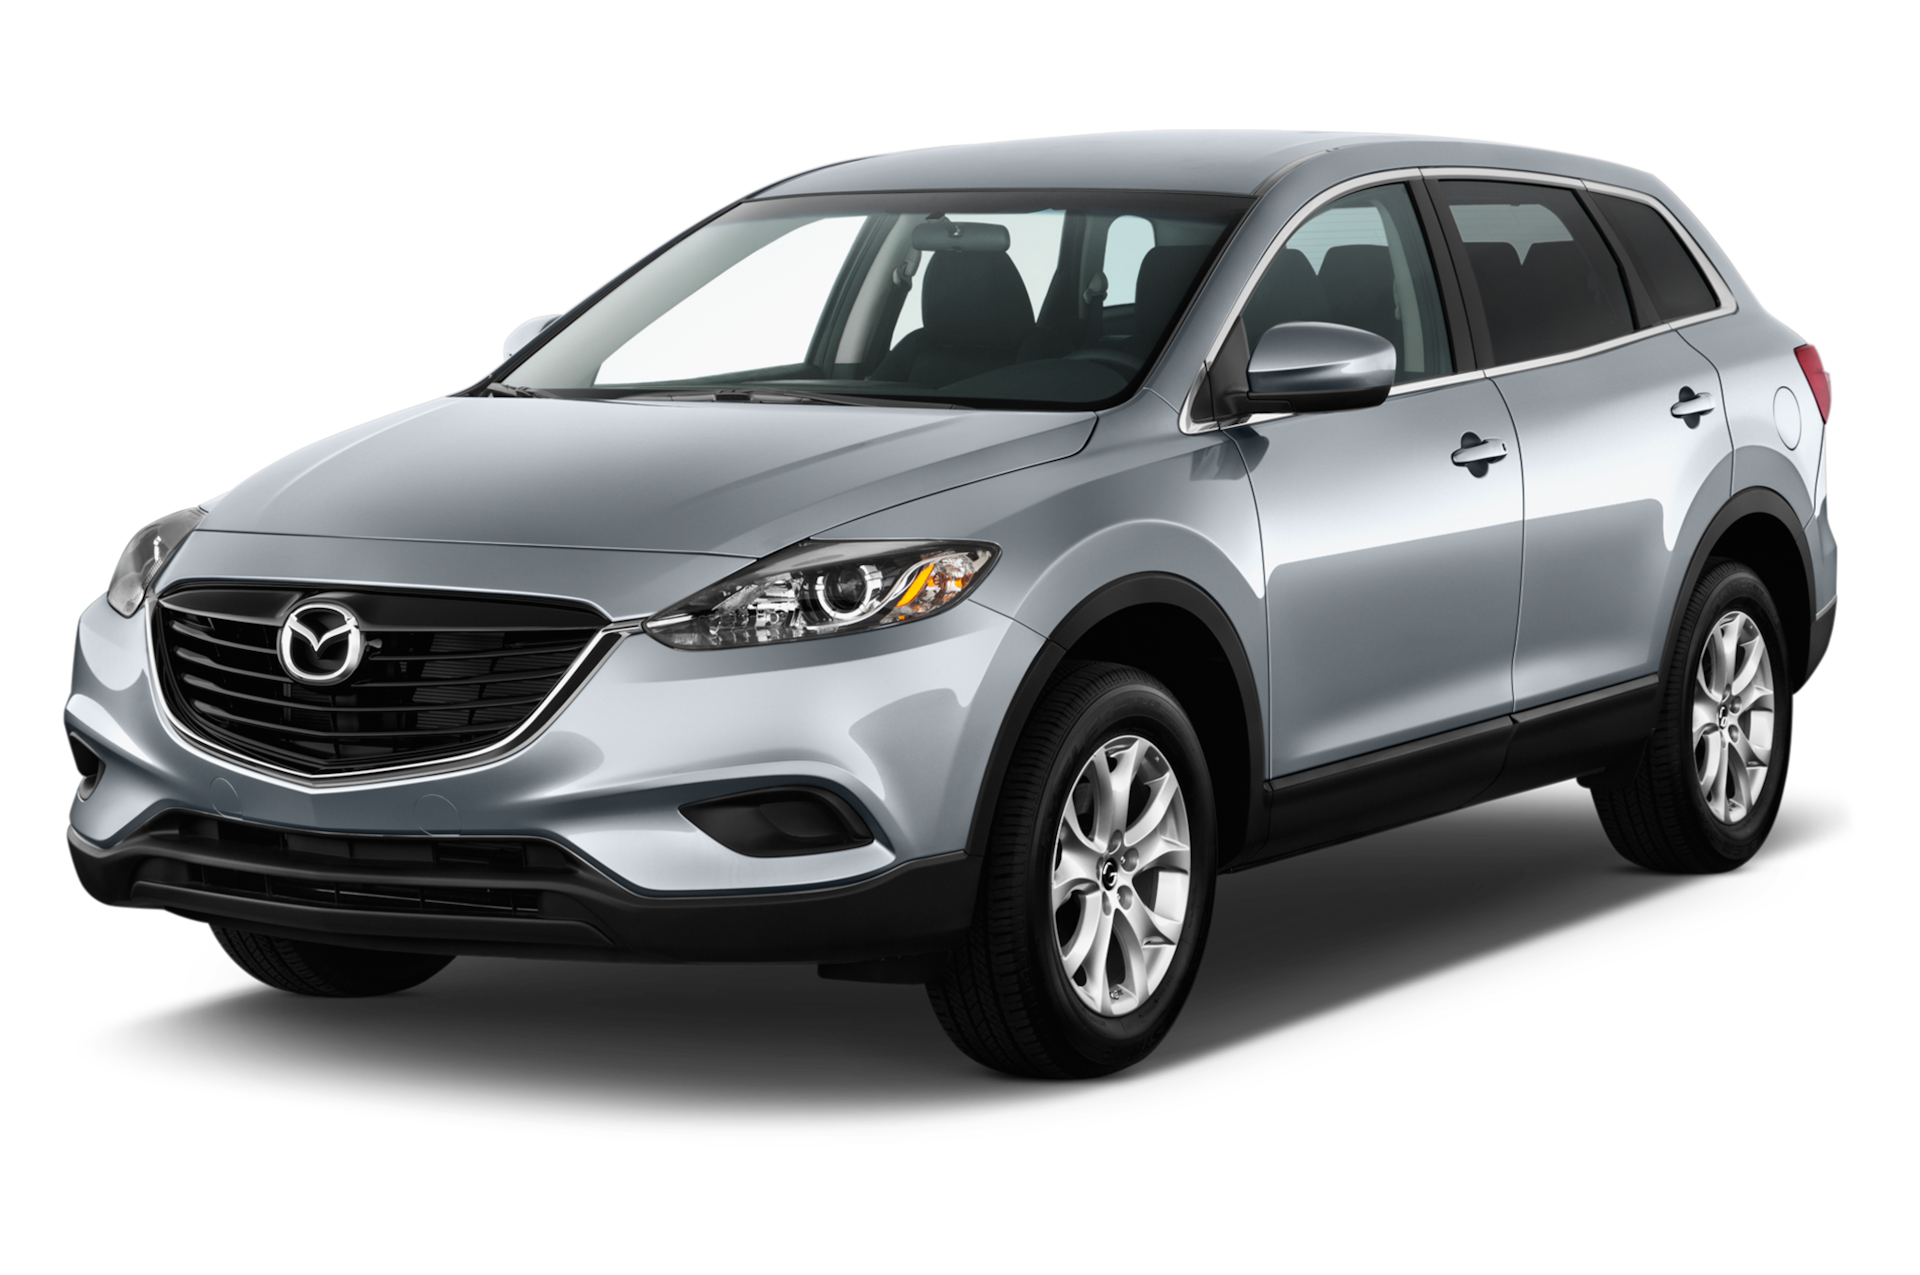 2013 Mazda CX-9 Prices, Reviews, and Photos - MotorTrend